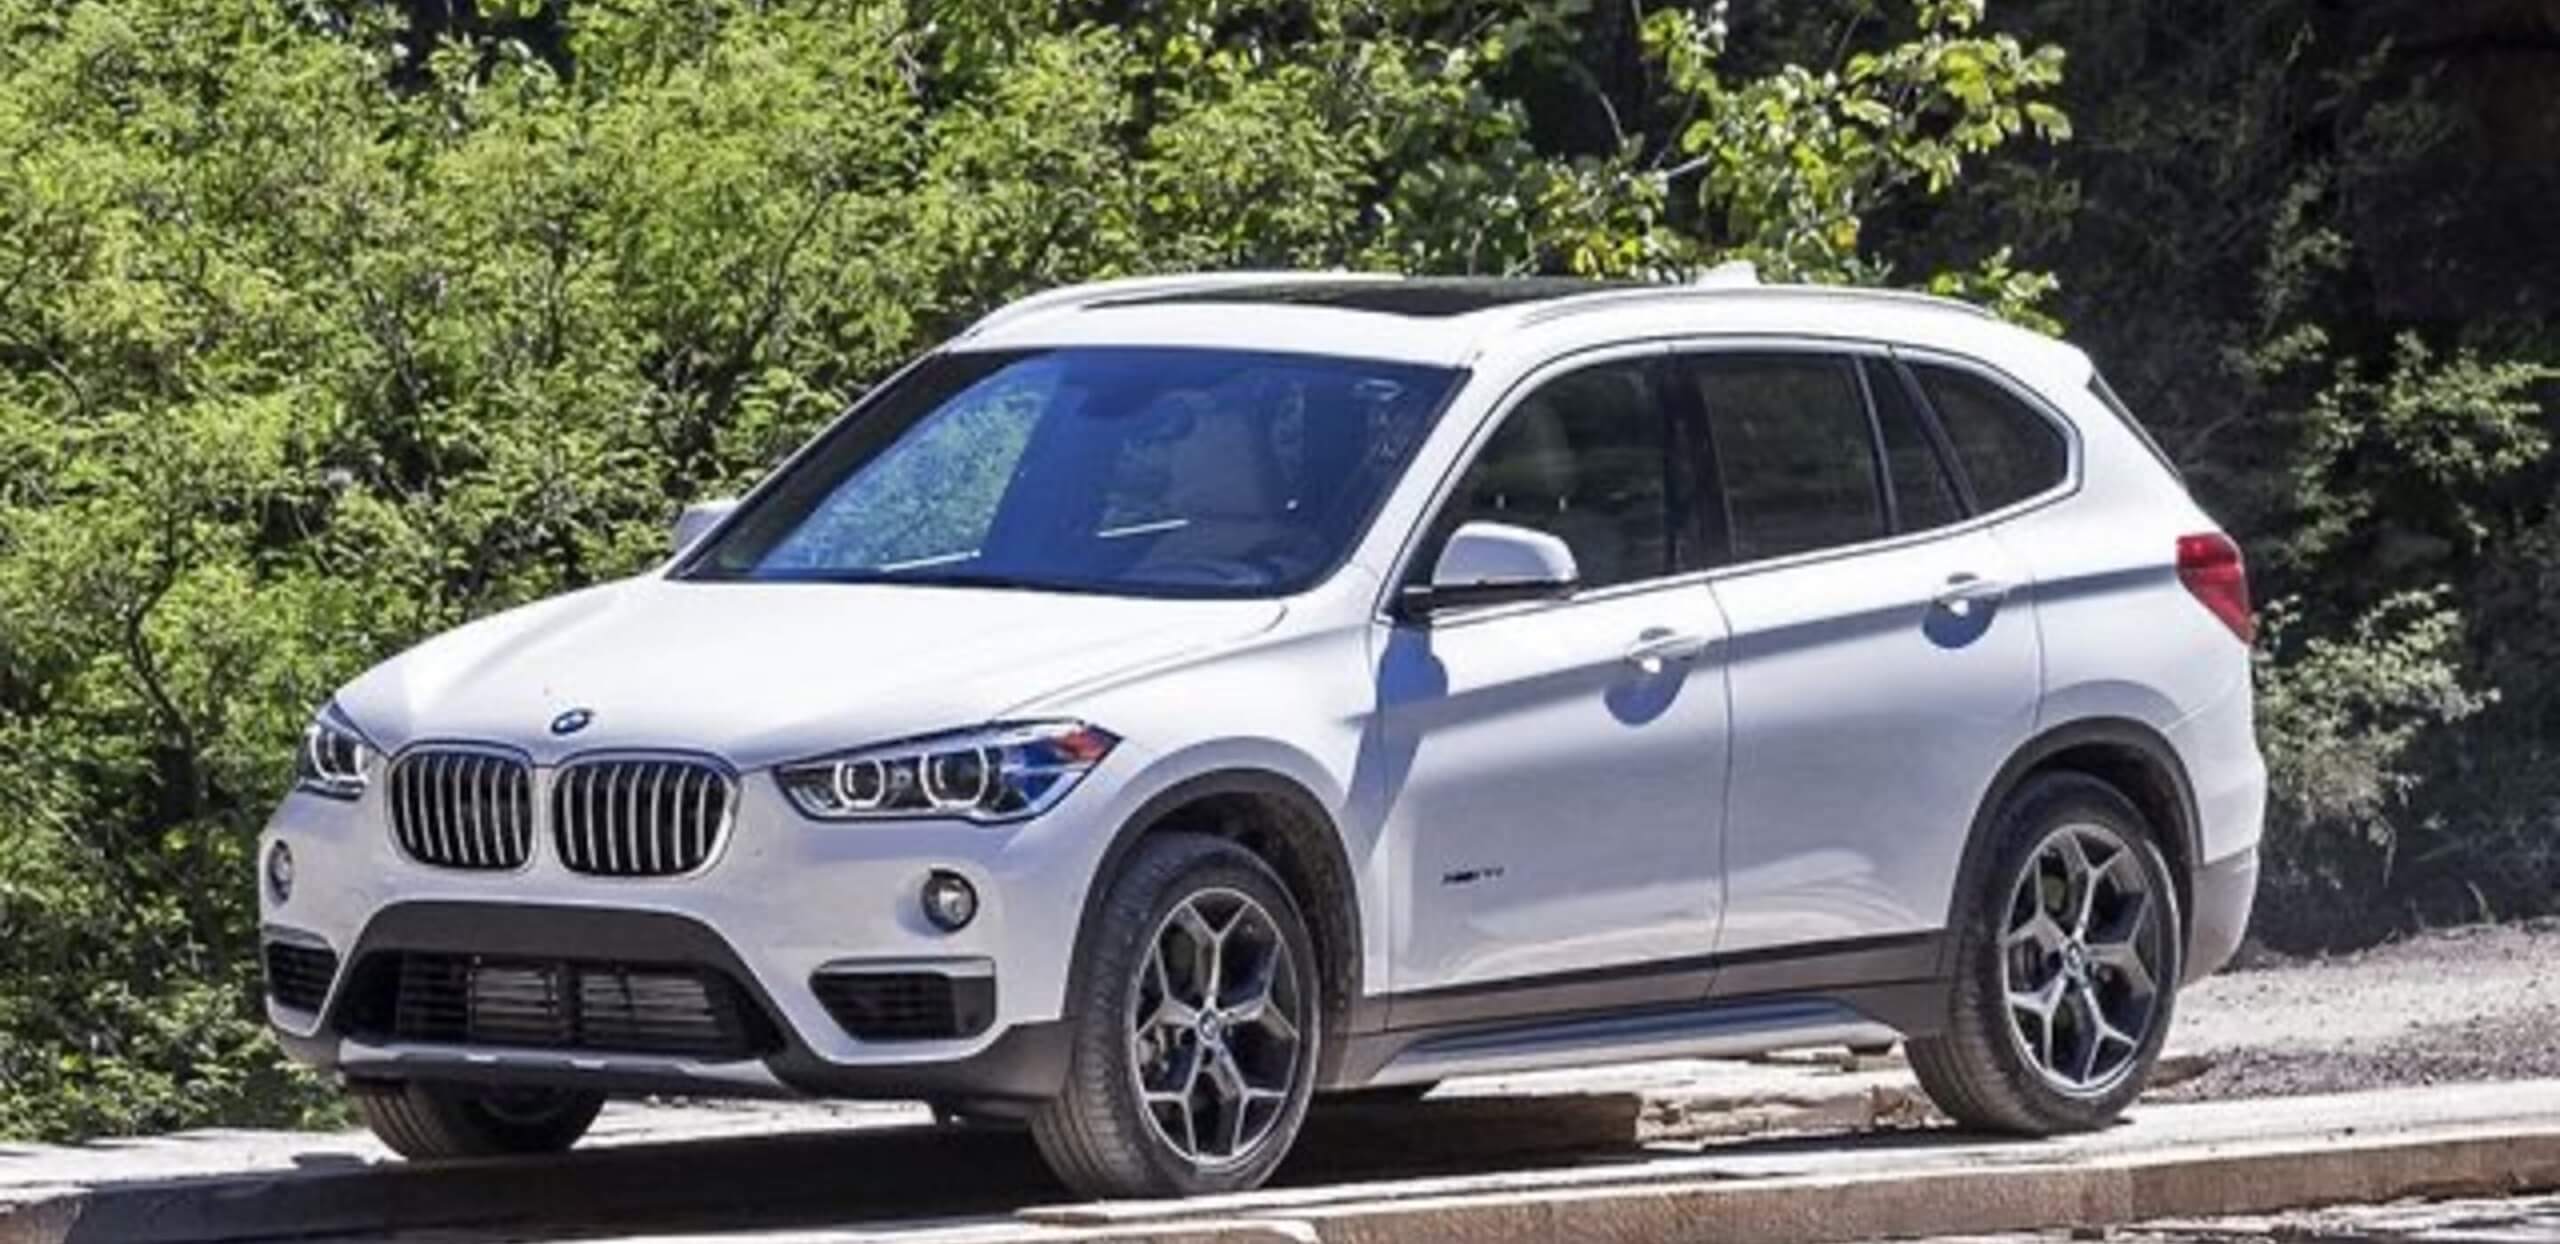 2018-bmw-x1-white-featured-image